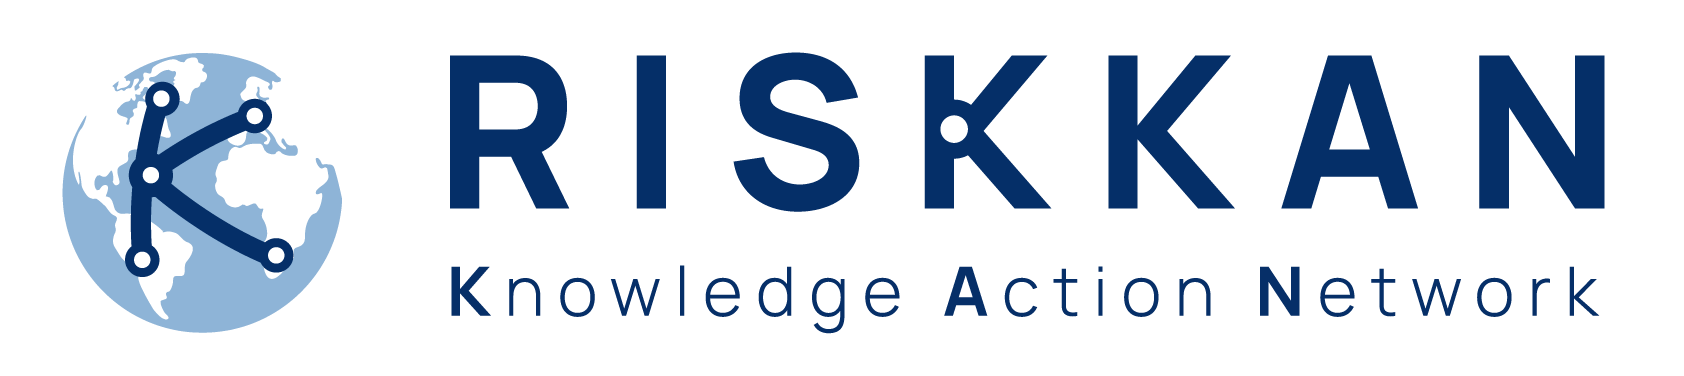 Knowledge-Action Network (KAN) on Emergent Risks and Extreme Events